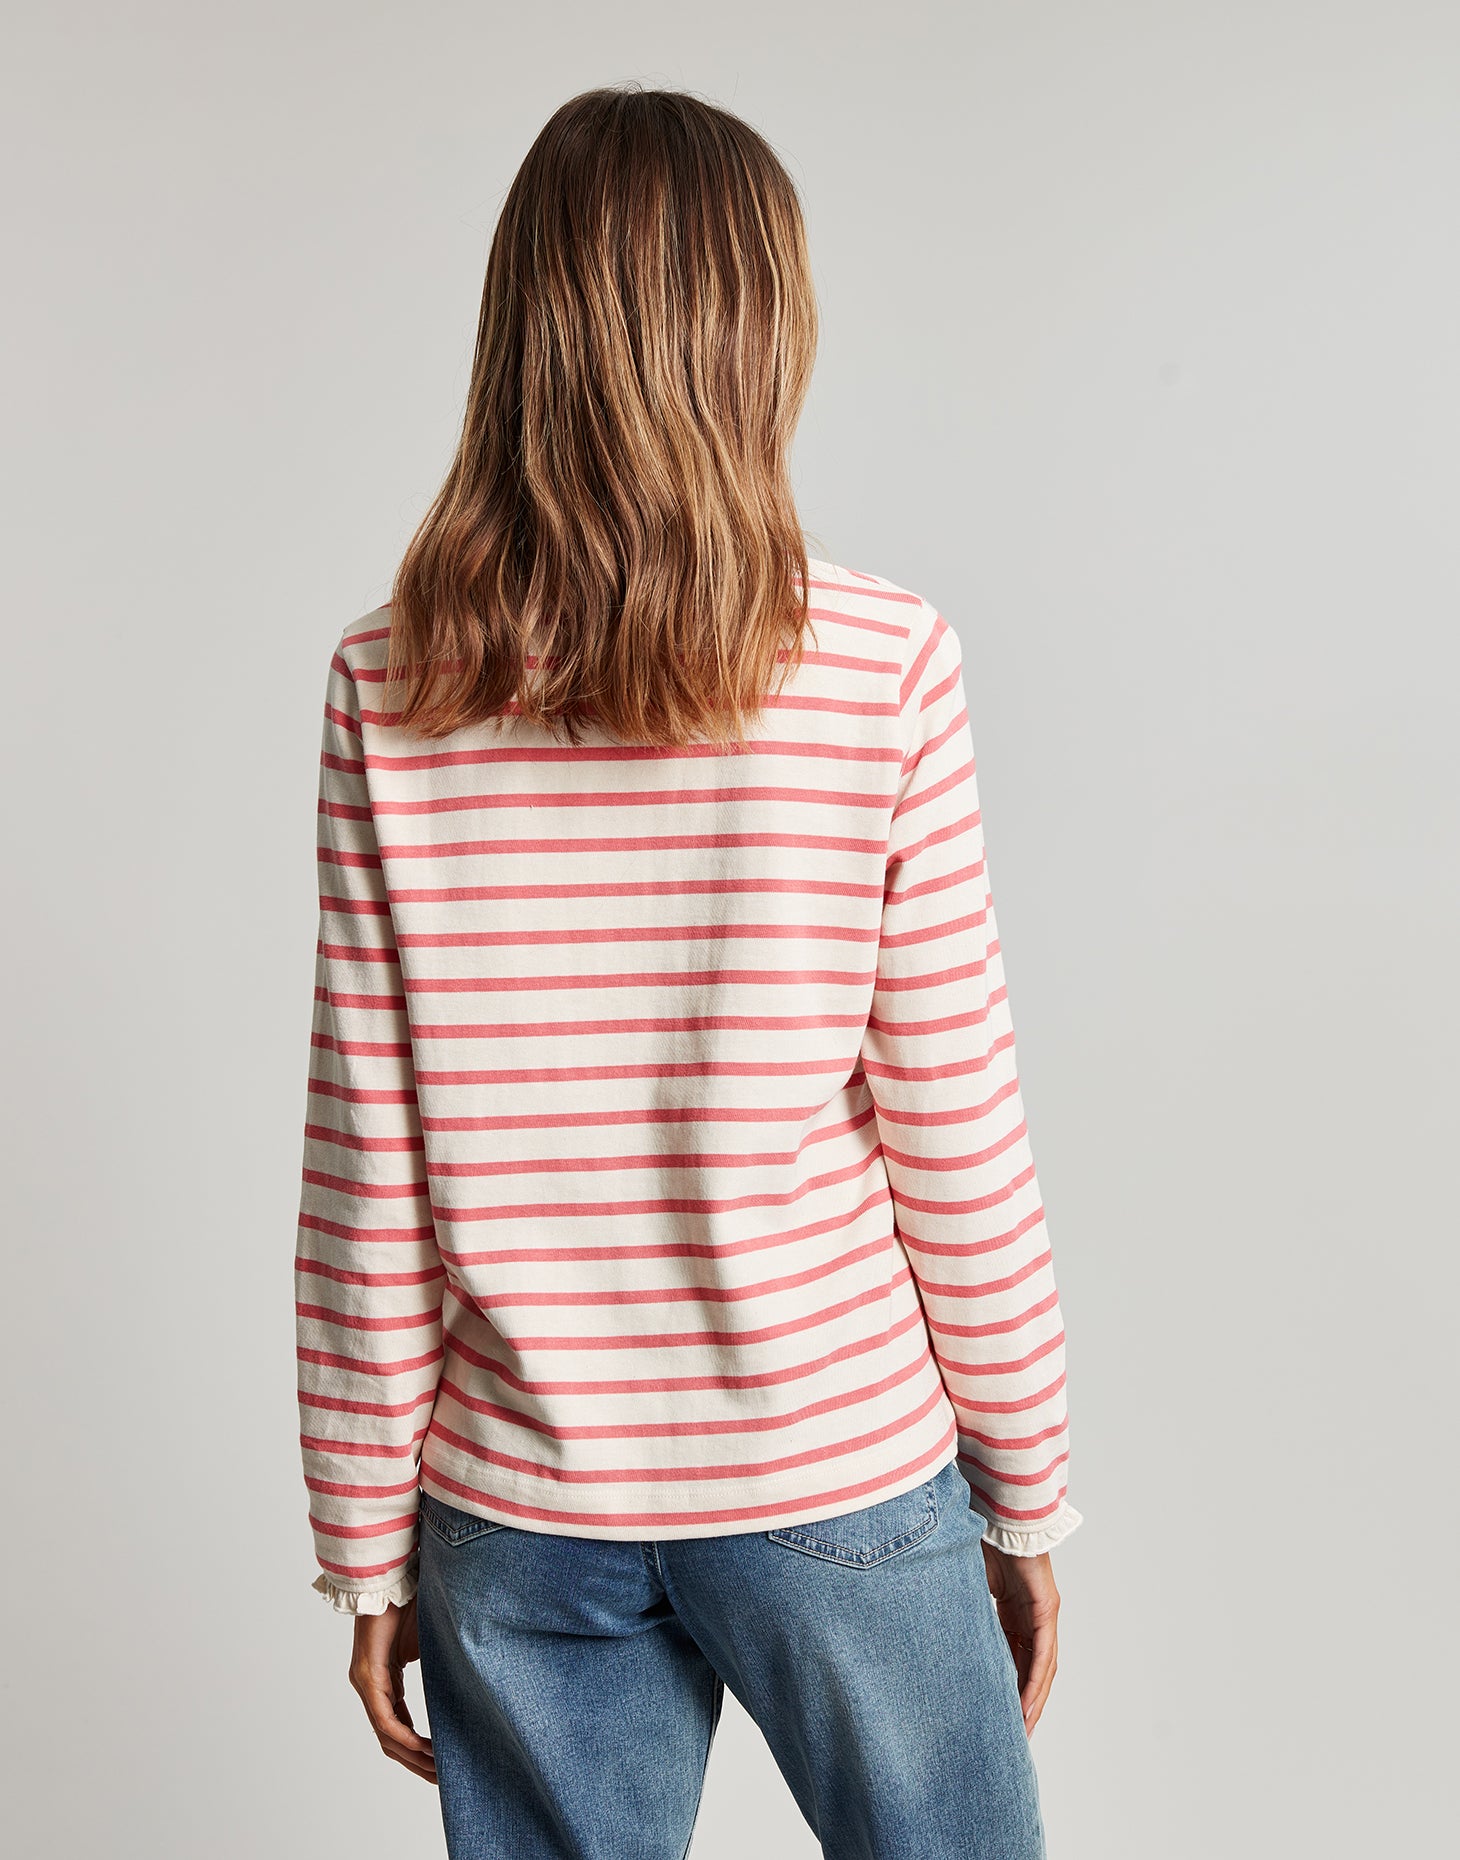 Daisy Long Sleeve Top with Frill - Coral Stripe